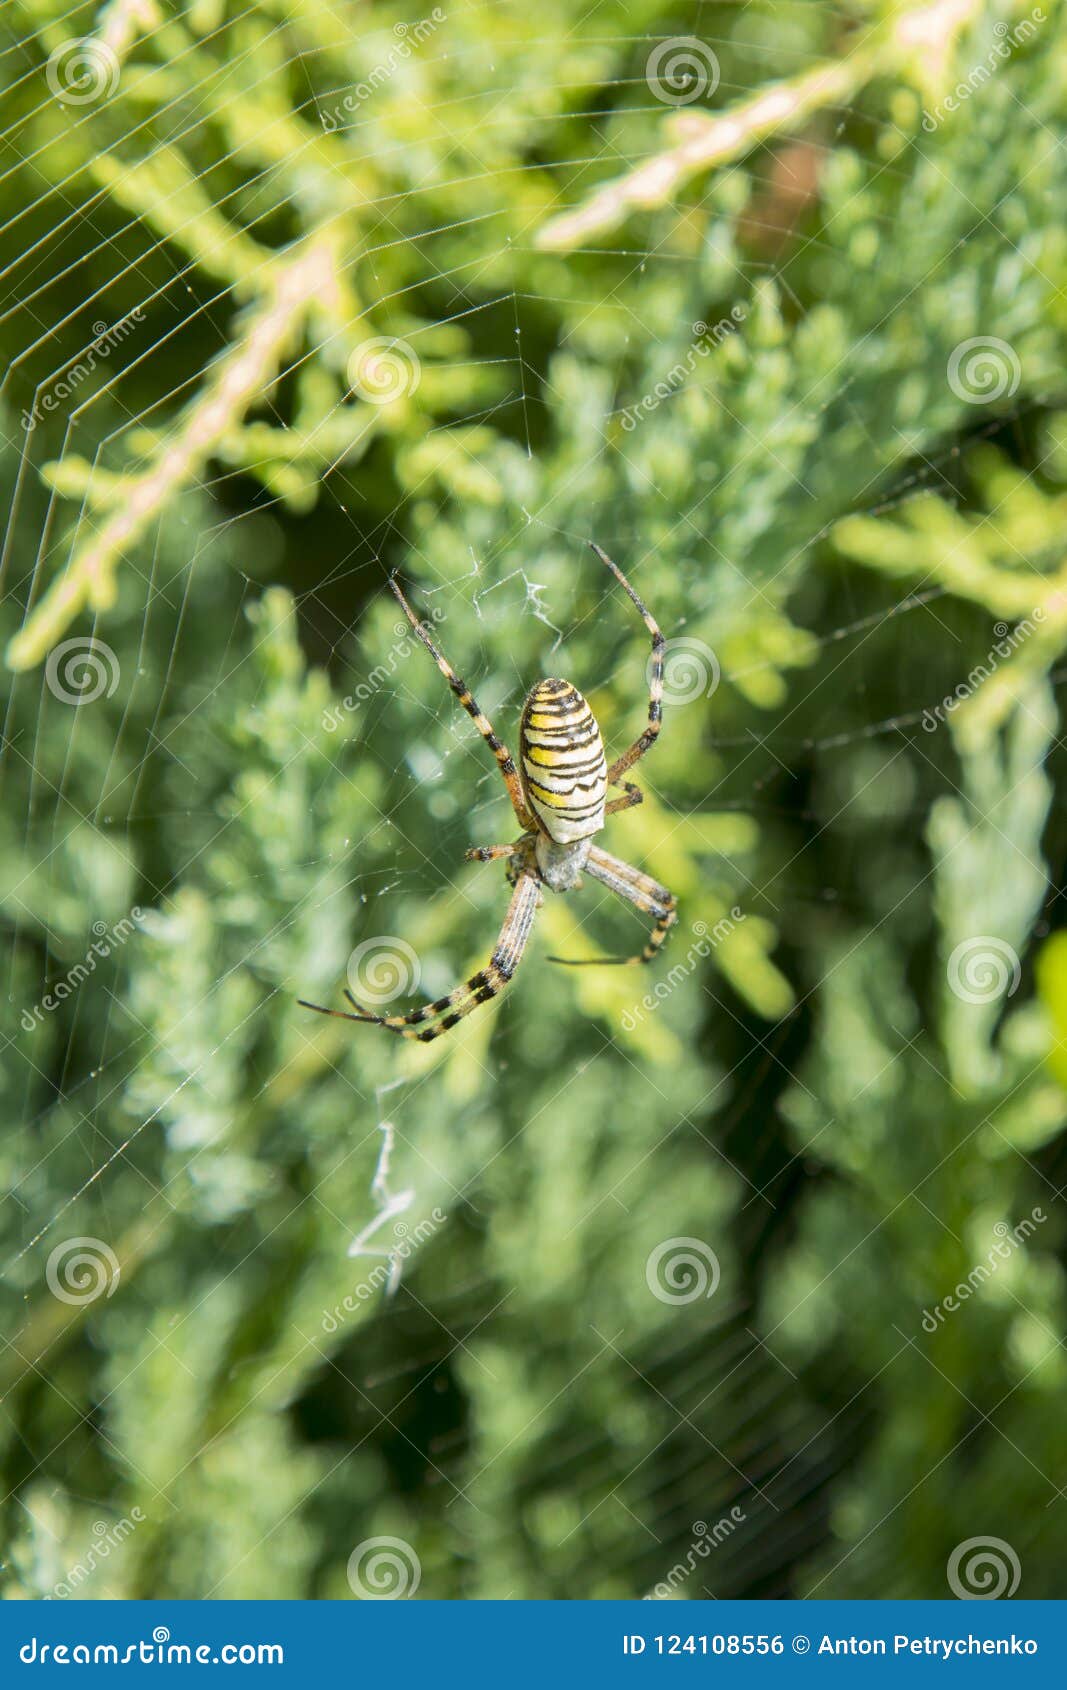 A Large Spider With Yellow Stripes On A Cobweb In The Garden